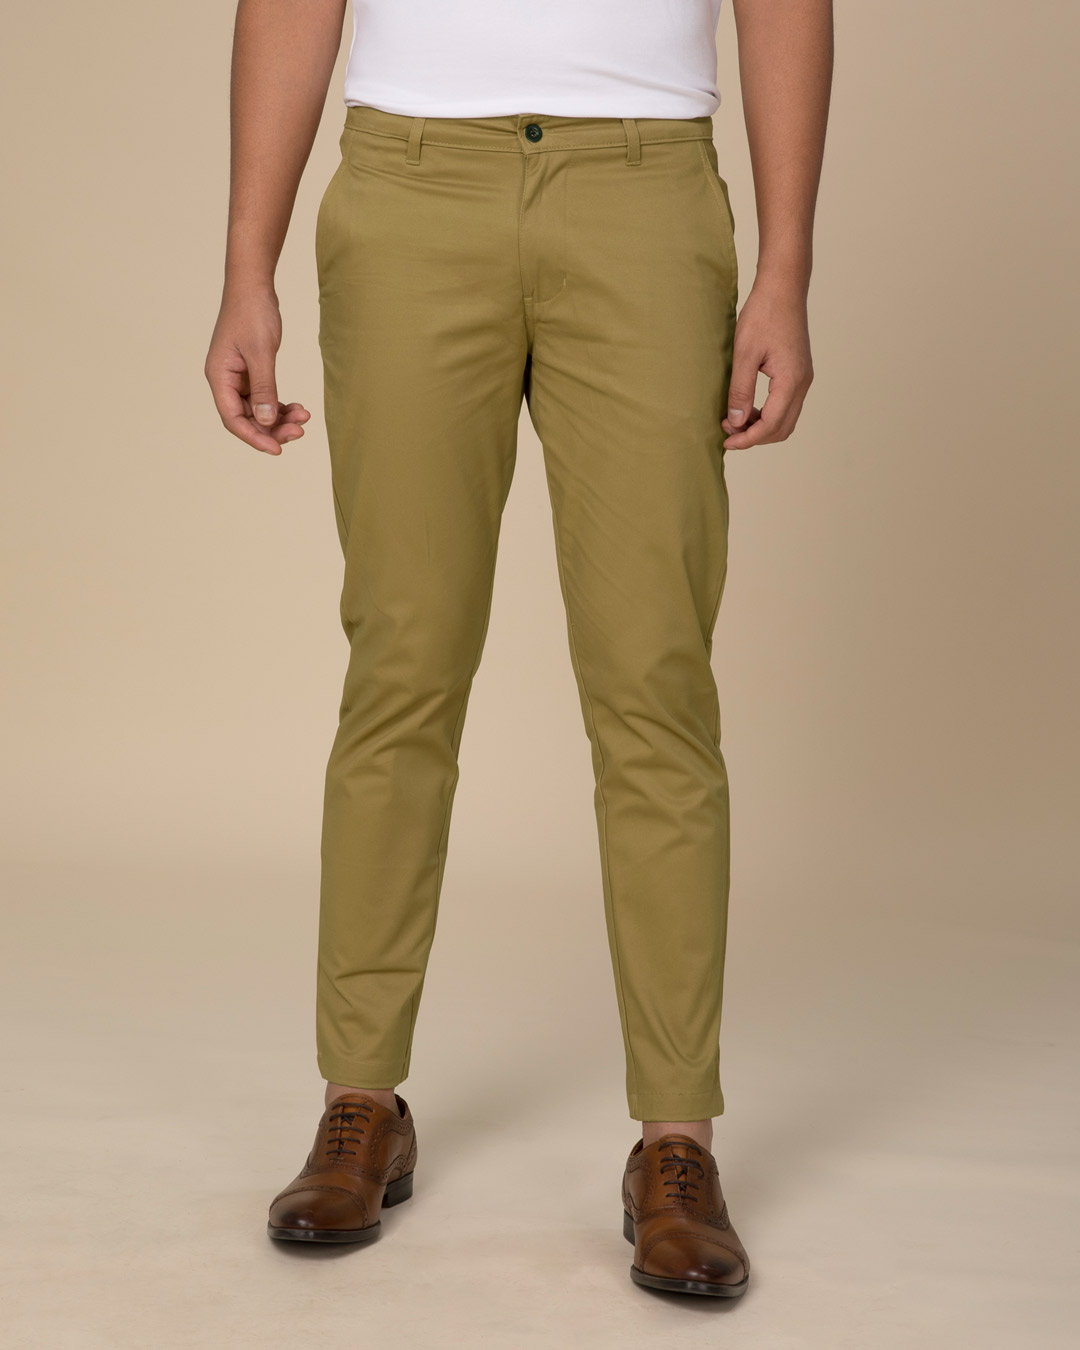 RedTape Mens Cotton Chinos  Woven Cotton Chinos  Comfortable Chinos for  Men  RTC0027